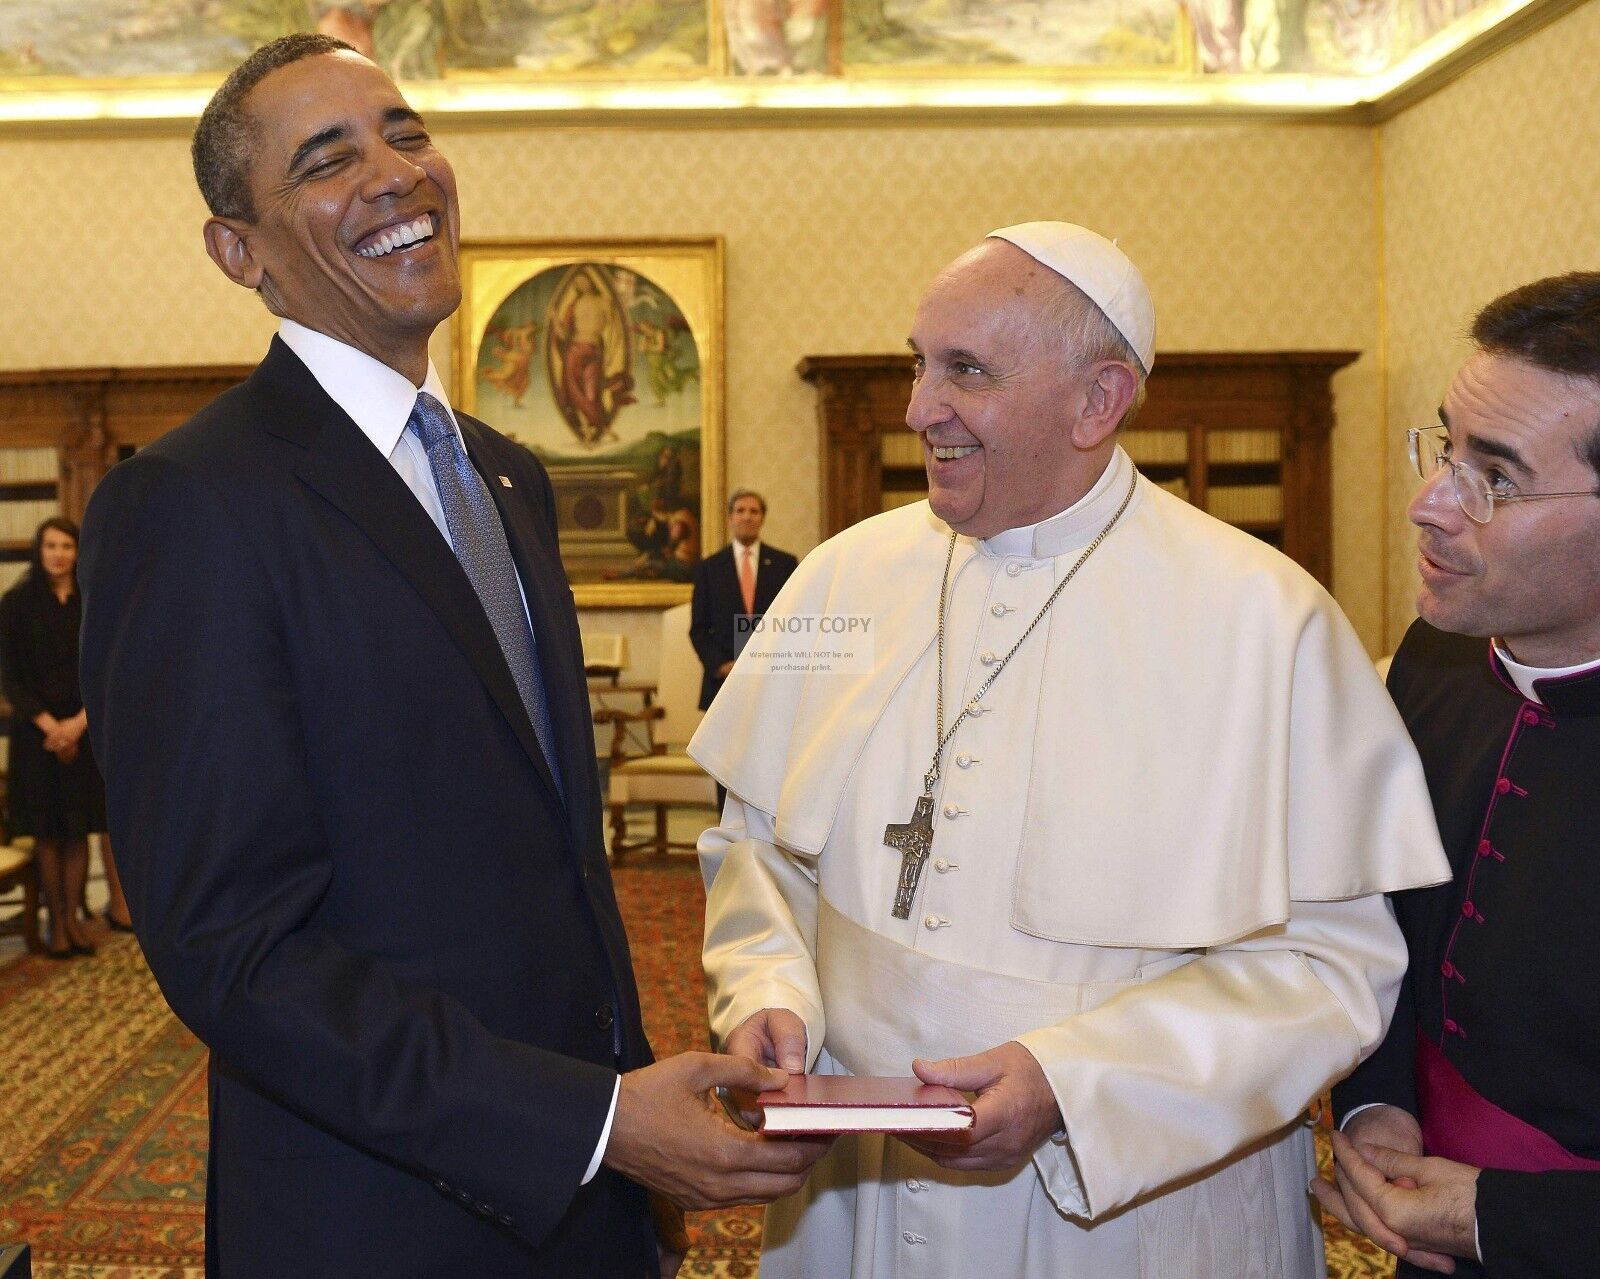 11X14 PHOTO - BARACK OBAMA AFTER PRIVATE AUDIENCE WITH POPE FRANCIS (DA-467)